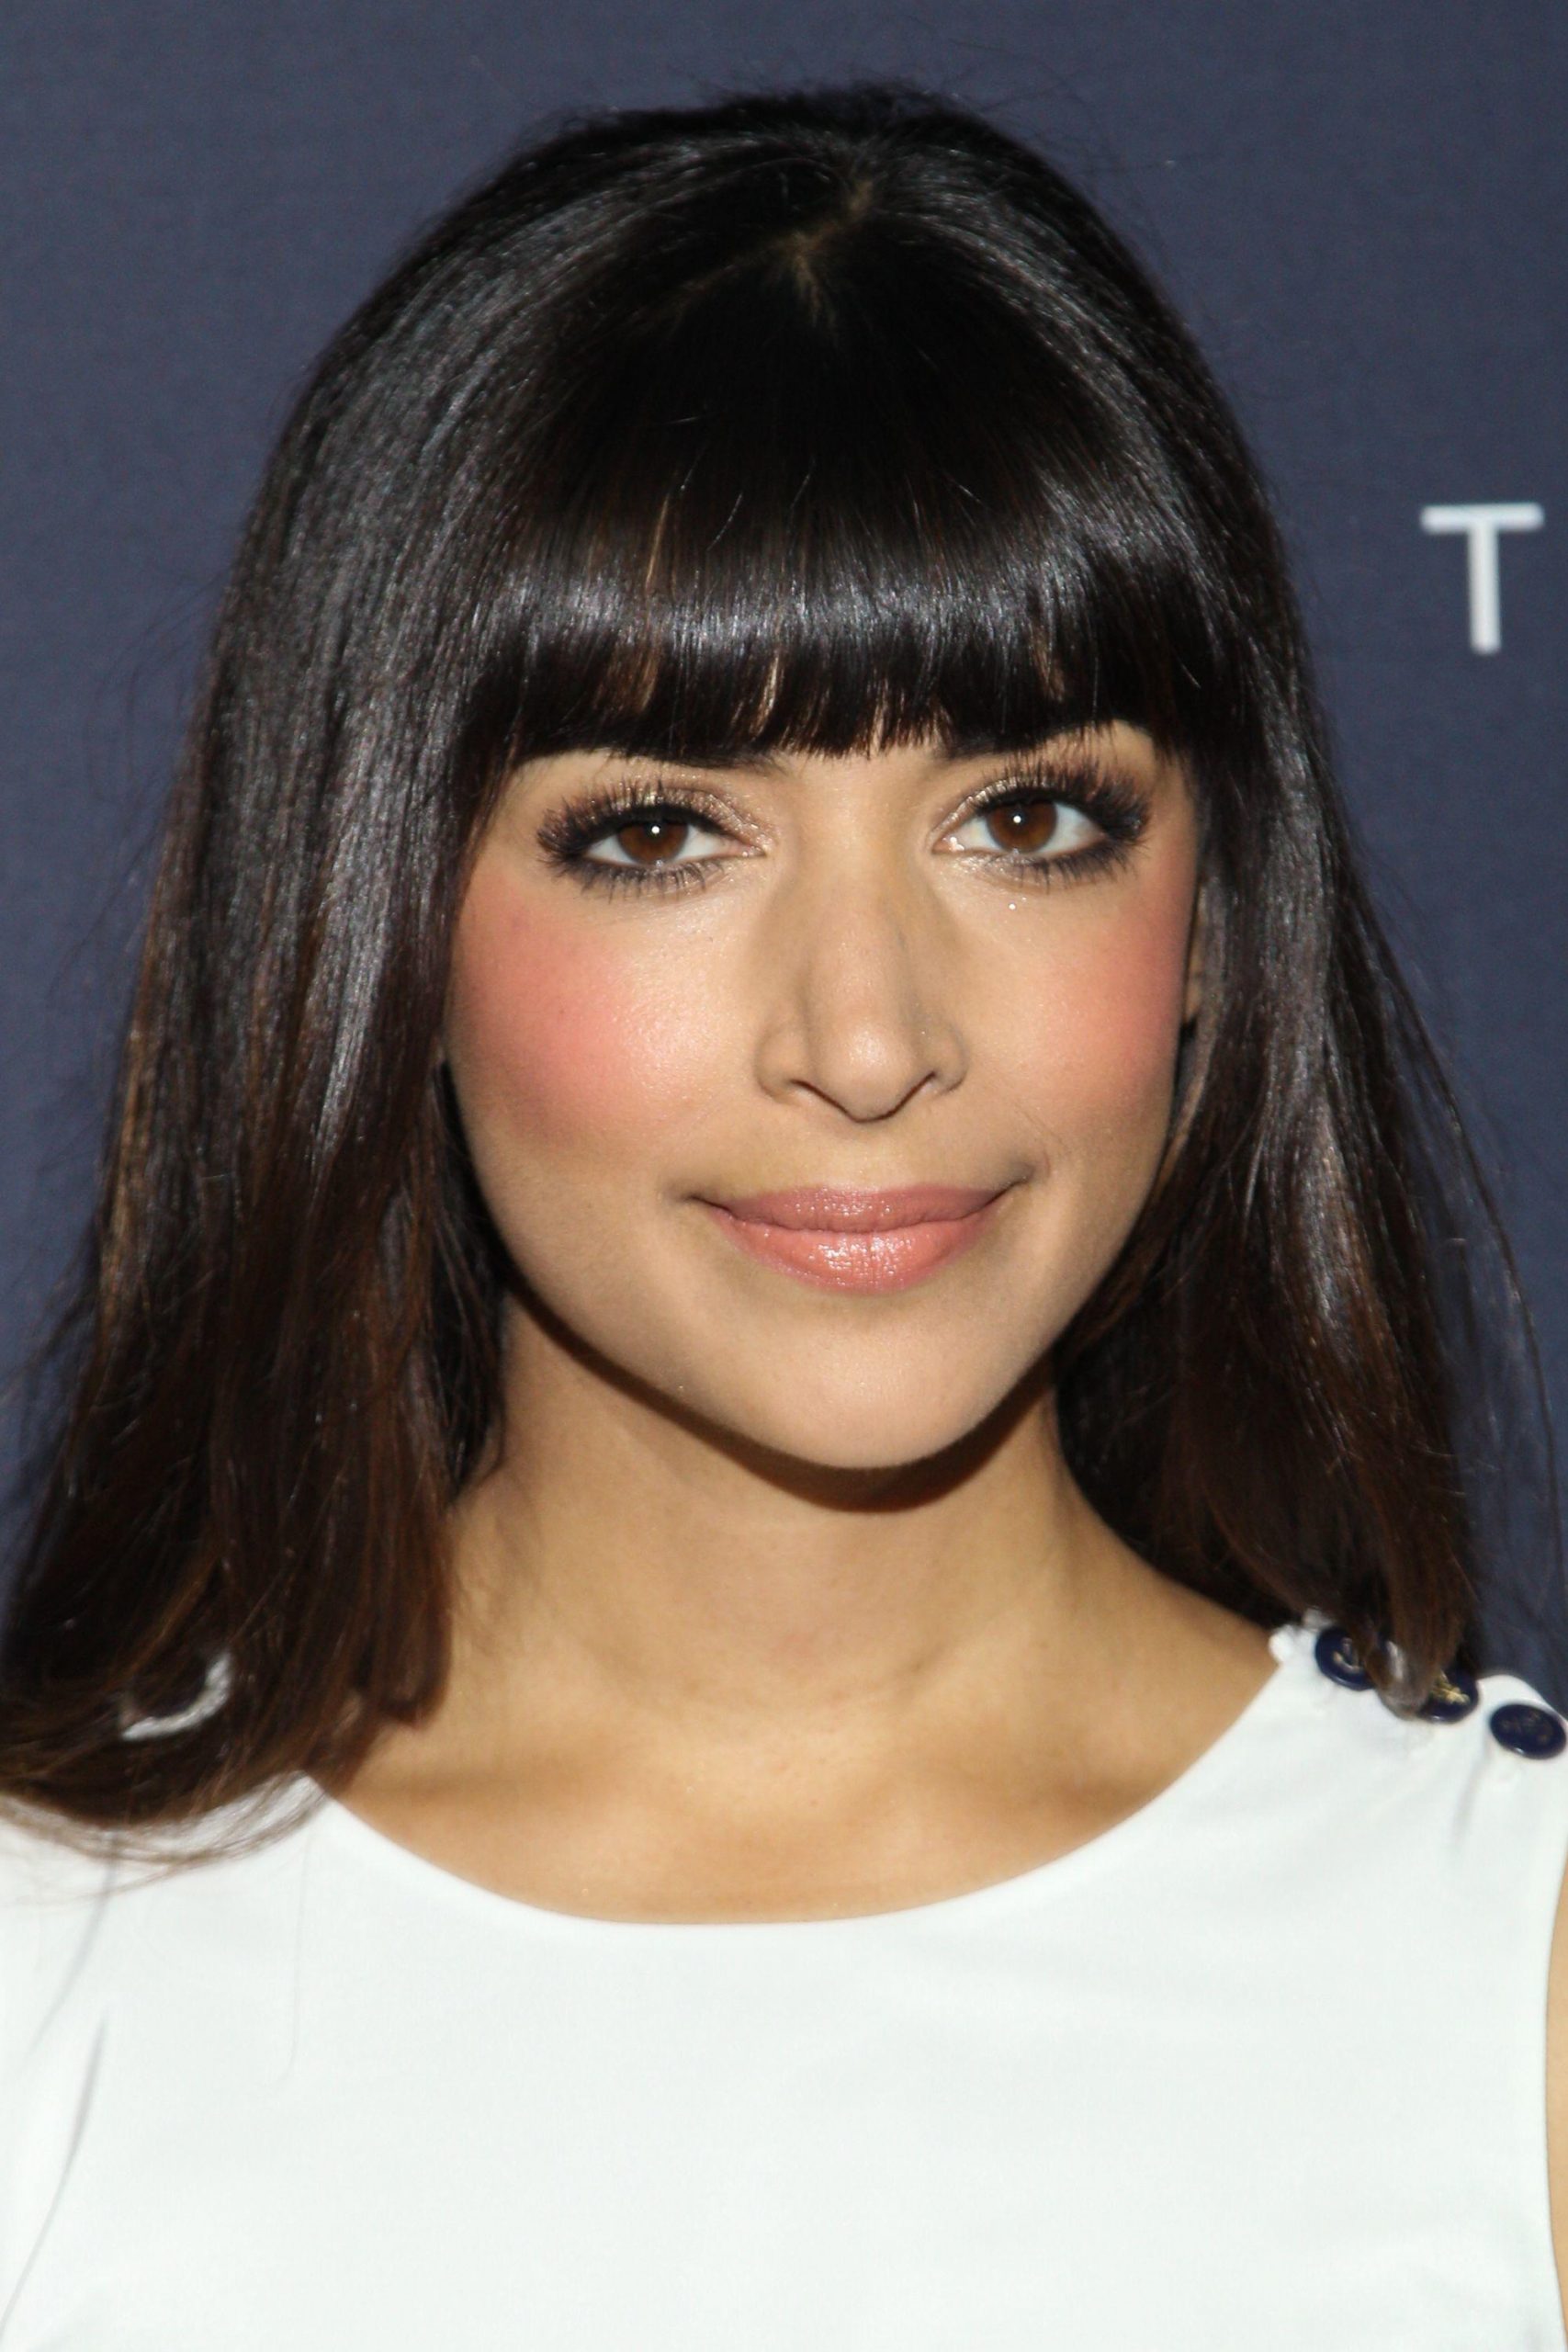 70+ Hot Pictures Of Hannah Simone Are Sexy As Hell 223